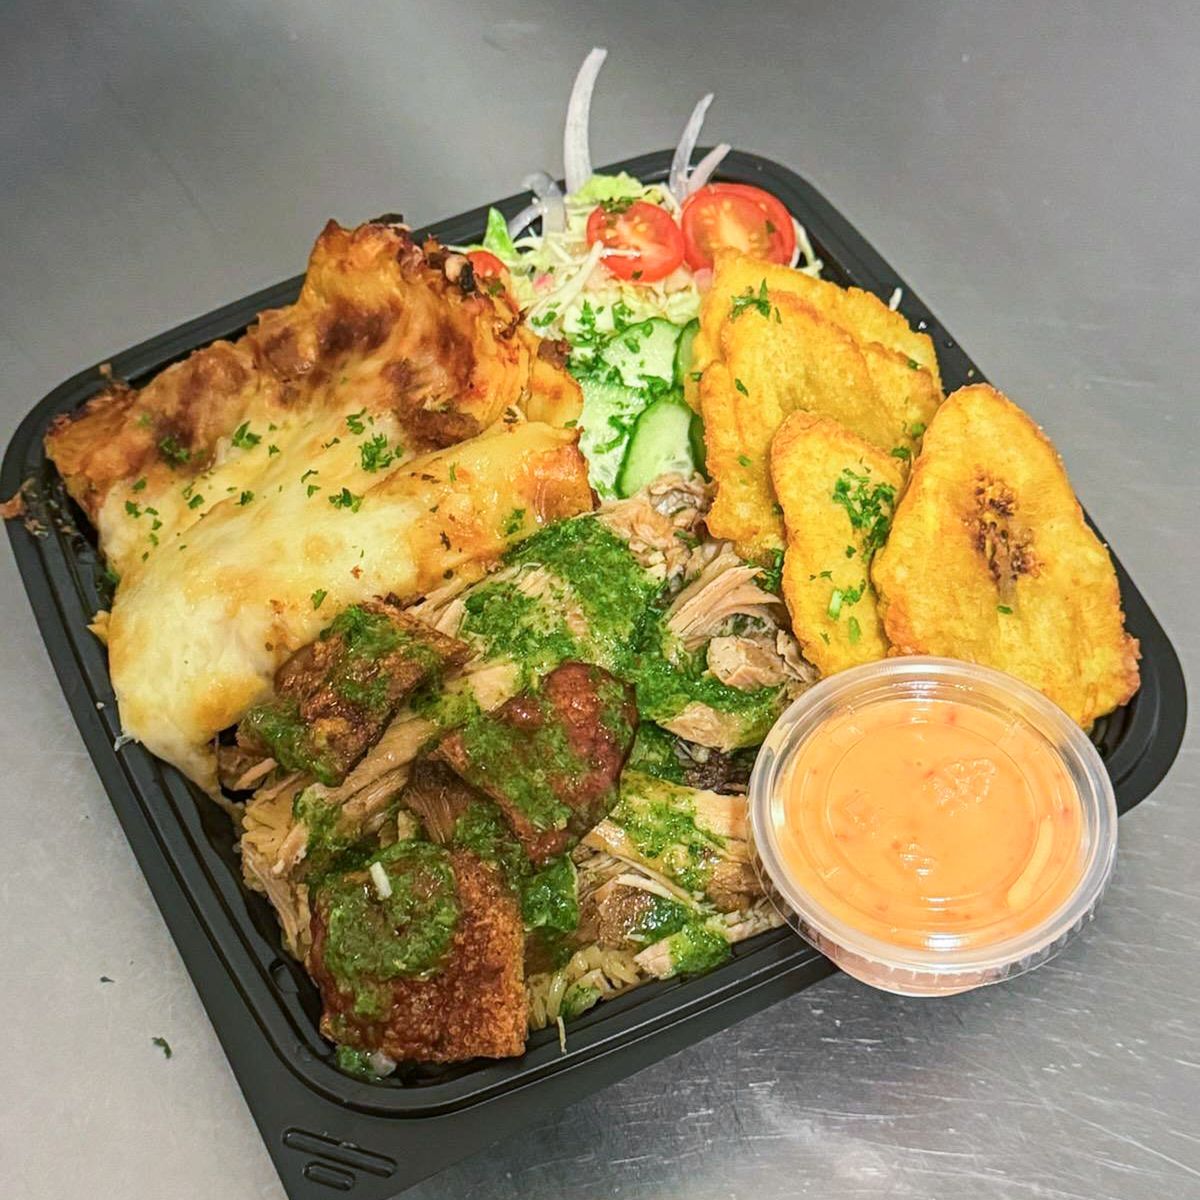 A takeout container of Dominican food with lasagna and fried plantains.